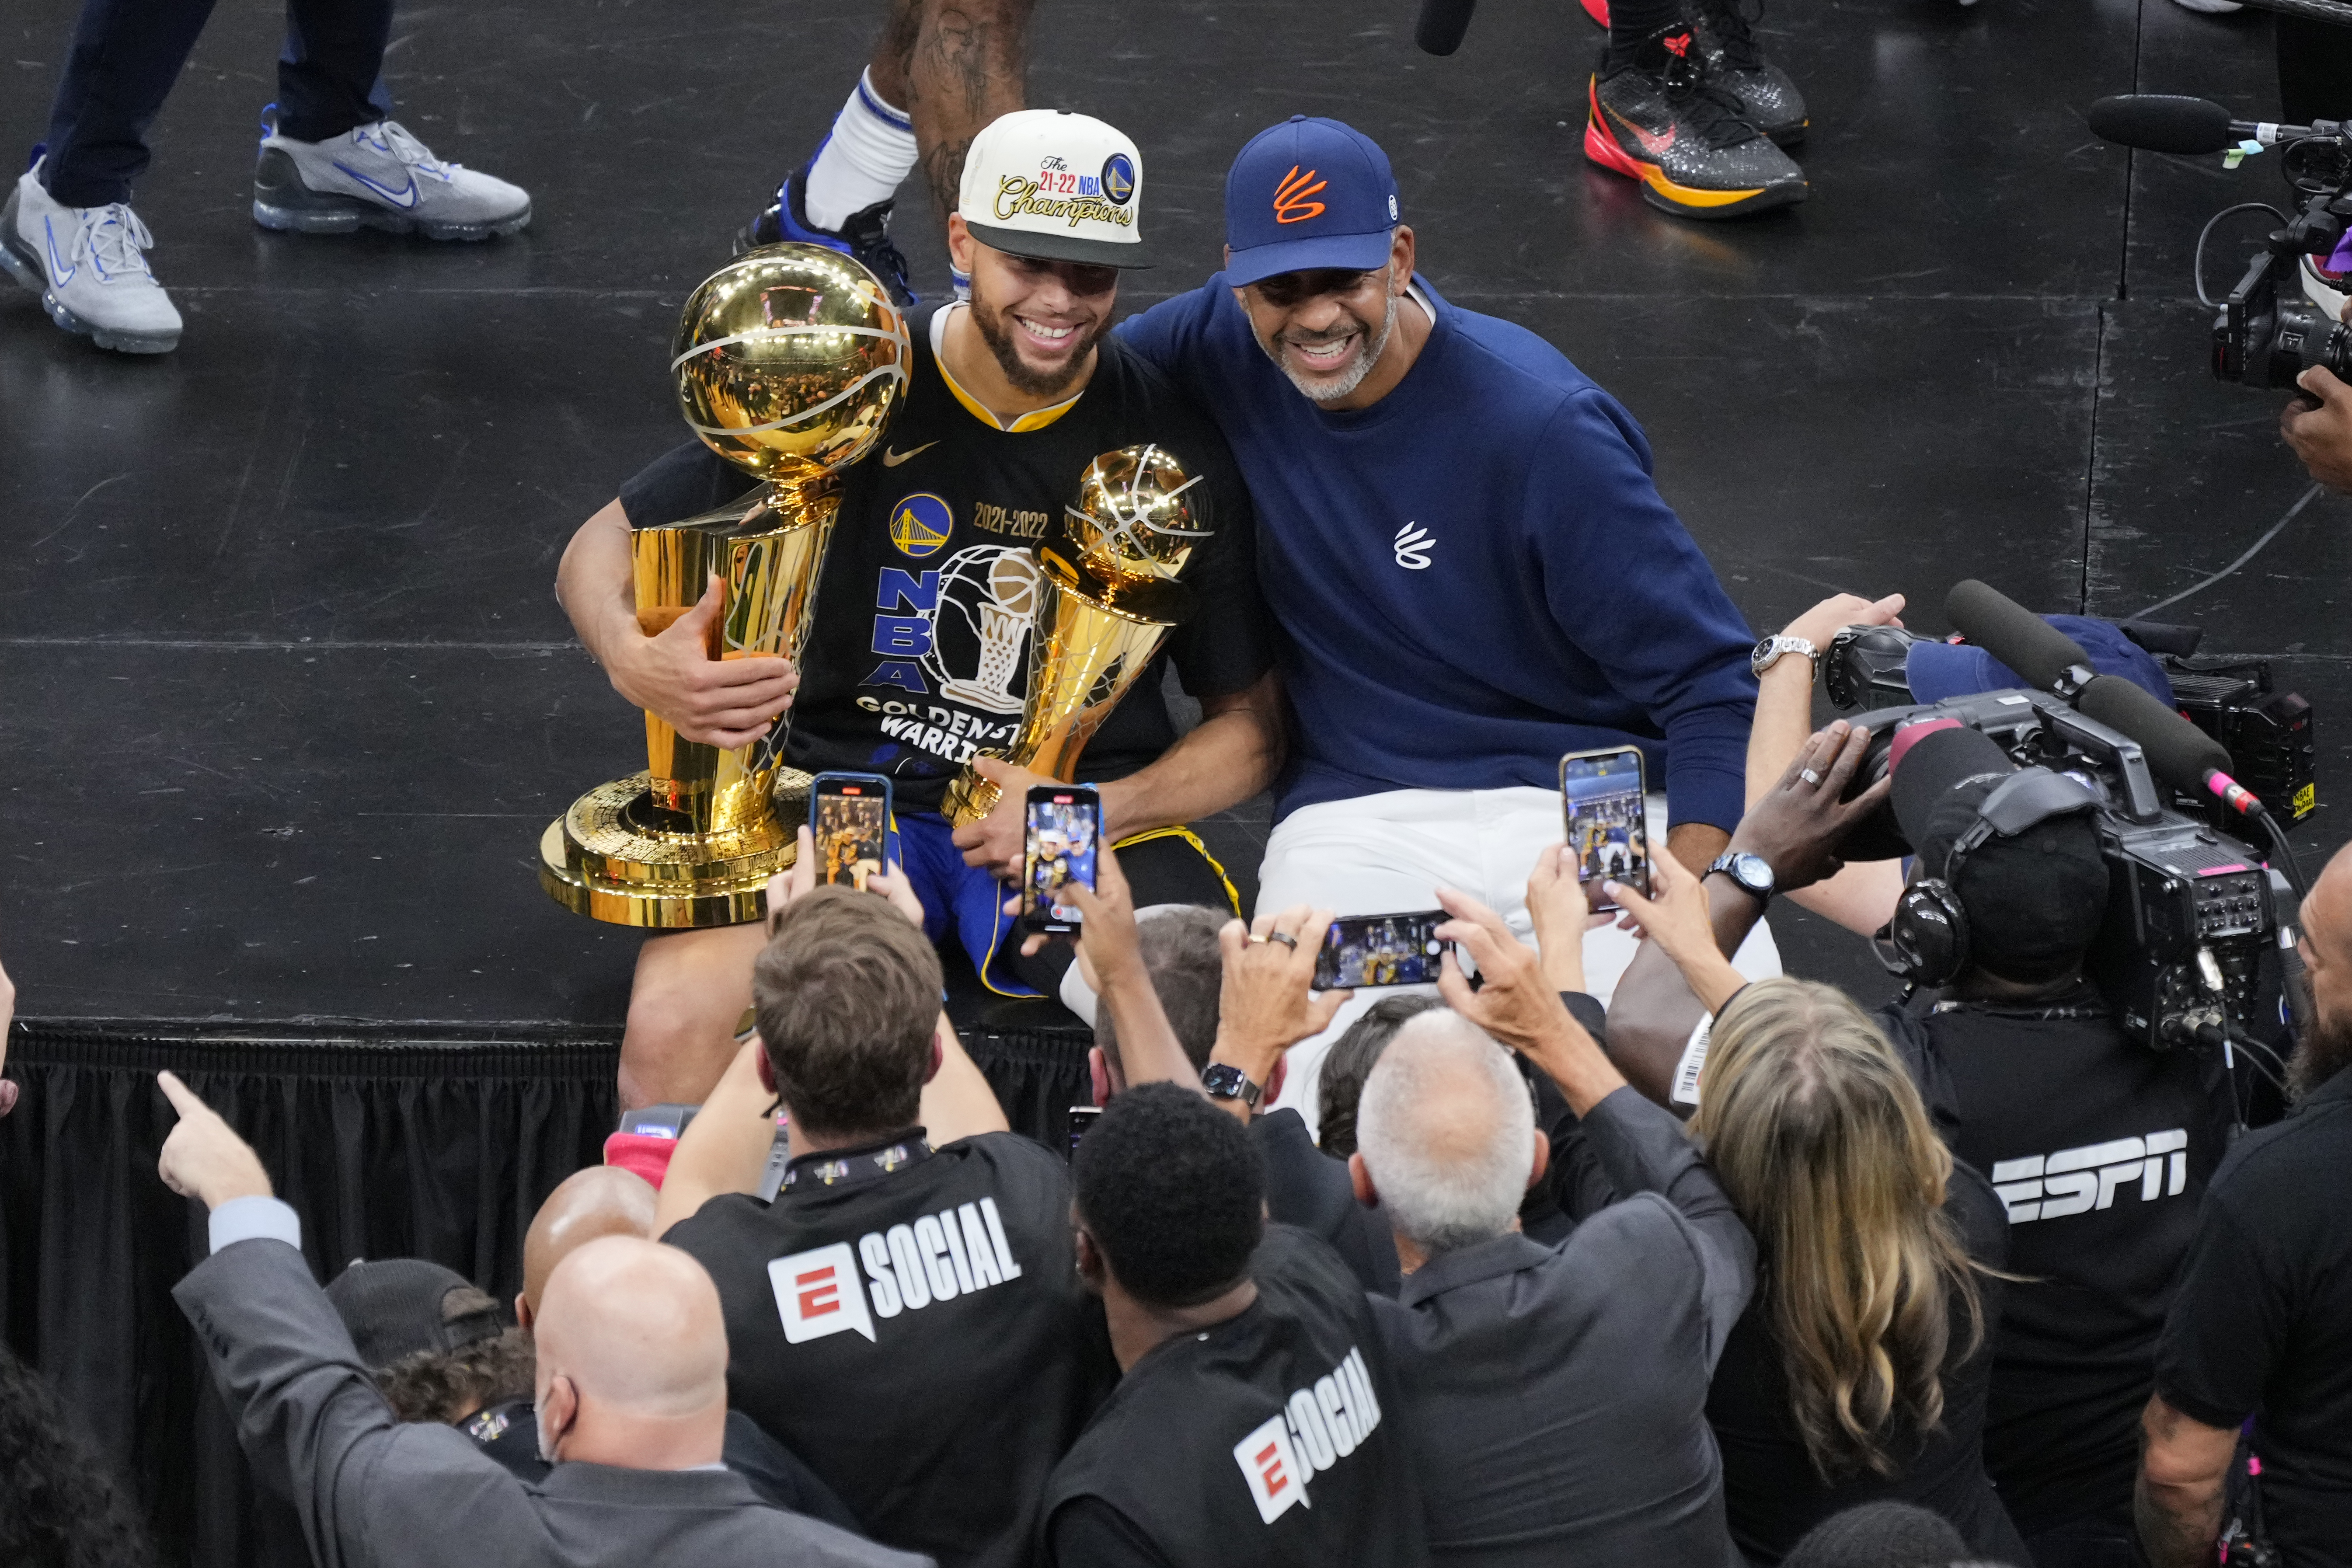 Stephen Curry celebrating with his dad Wardell Curry after winning game six of the 2022 NBA Finals on June 16, 2022, in Boston, Massachusetts. | Source: Getty Images